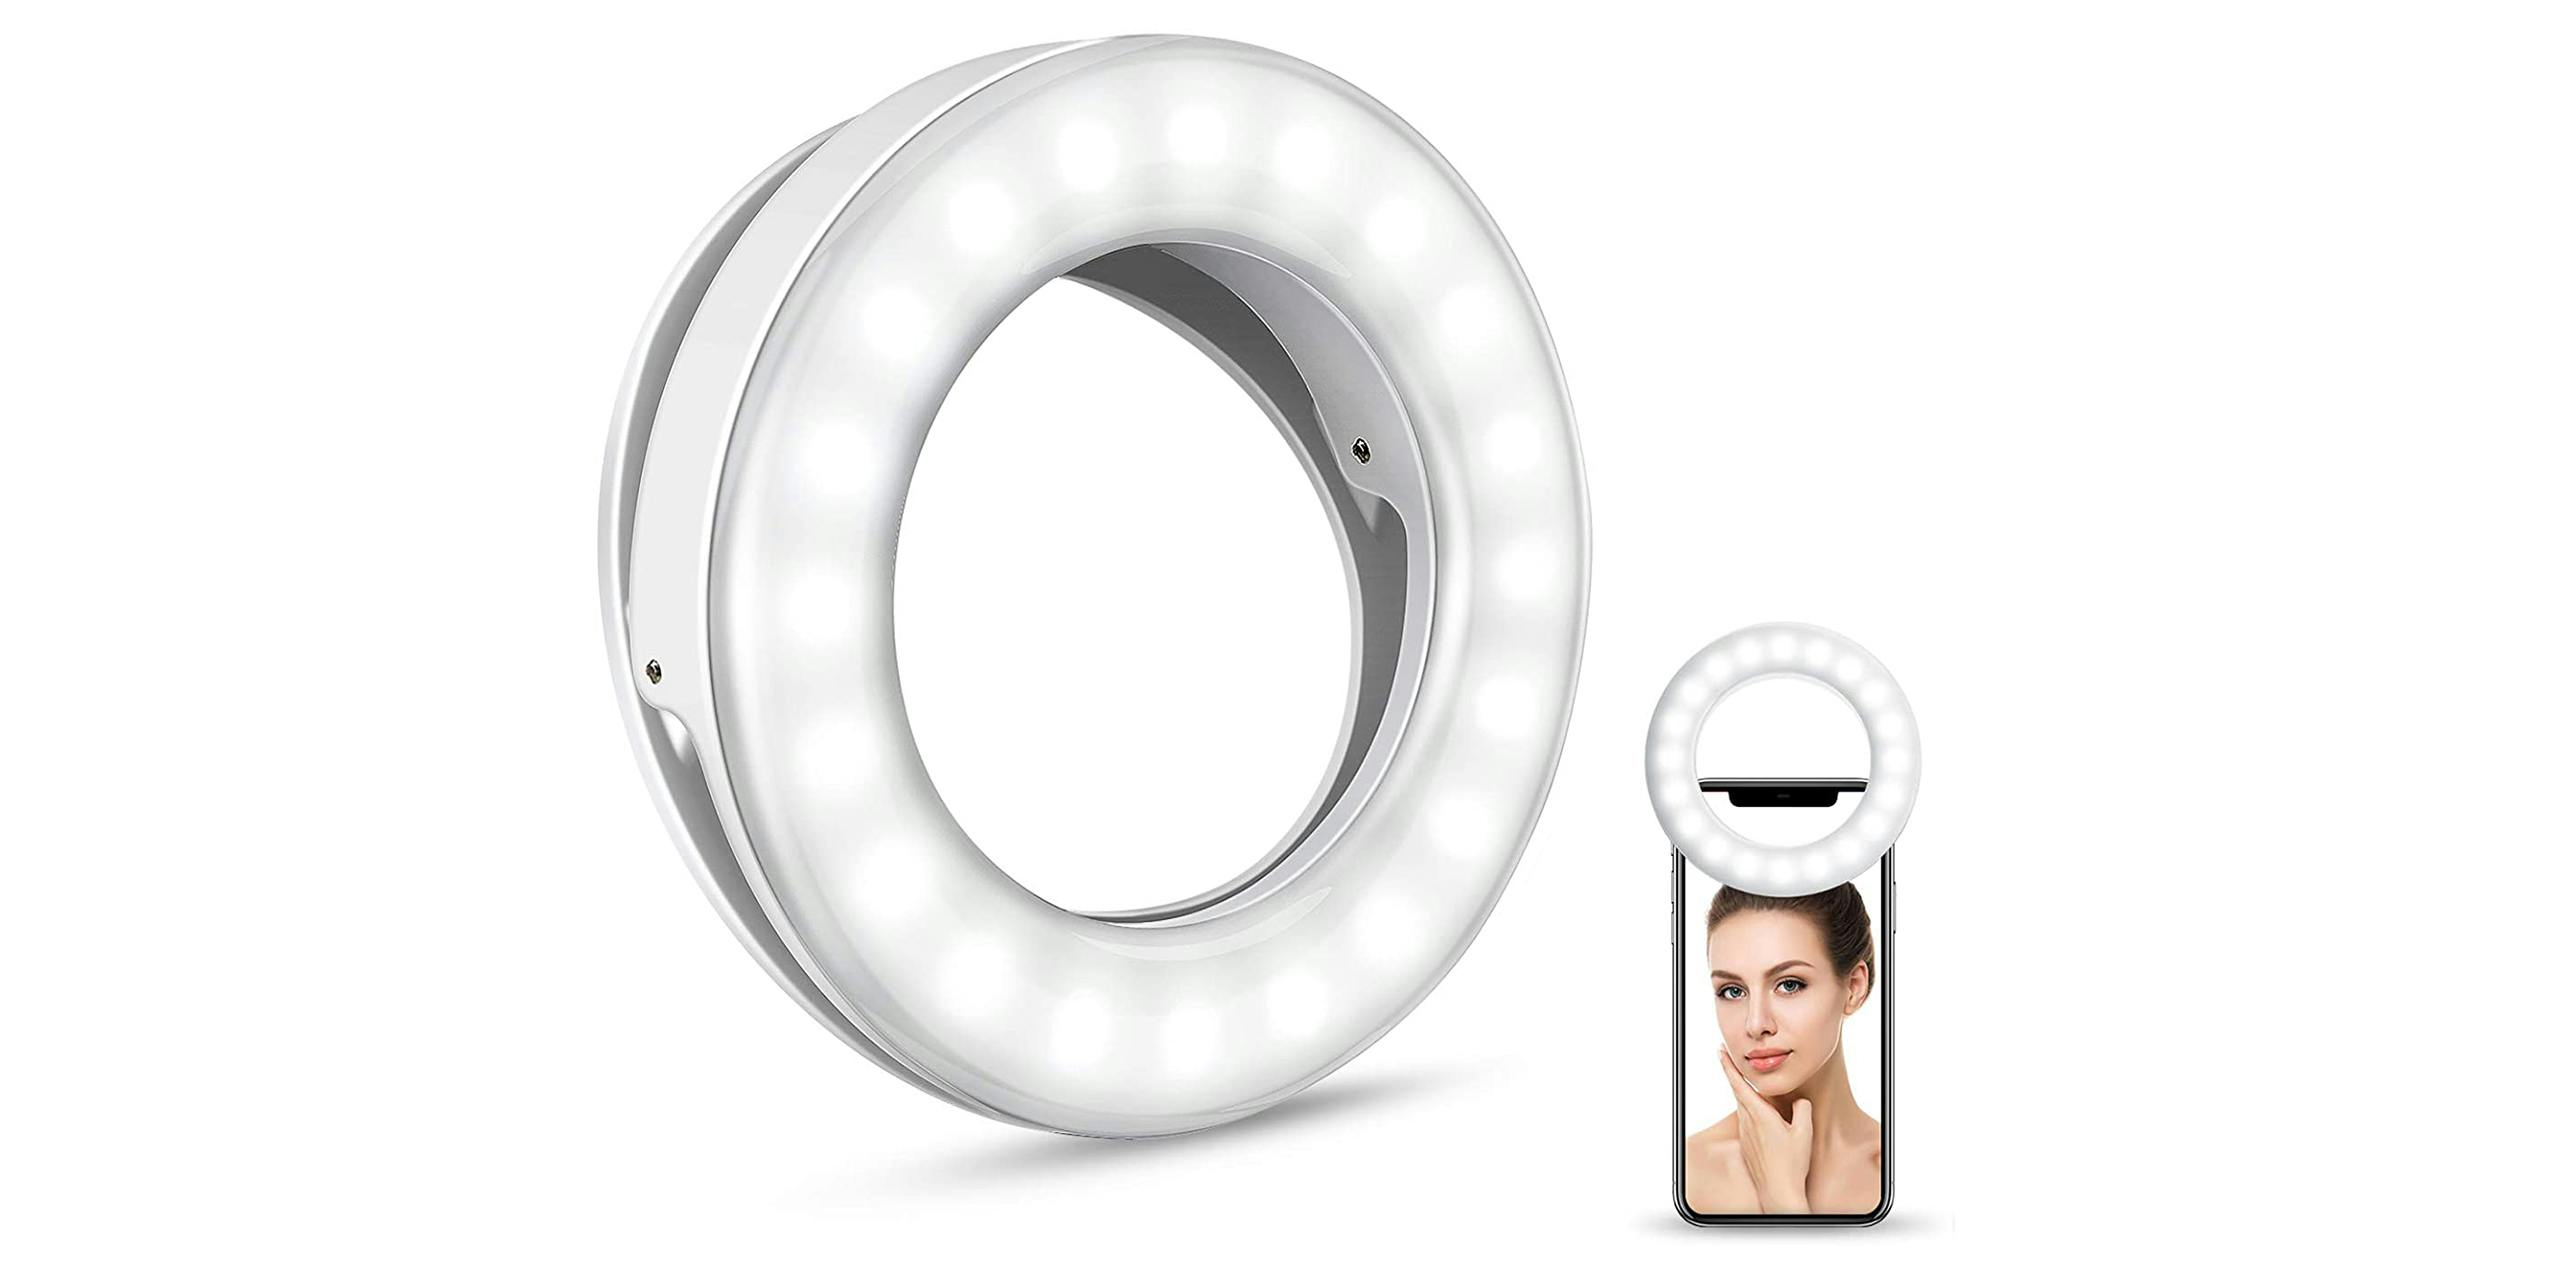 Selfie Ring Light propped up on the front of a smartphone.